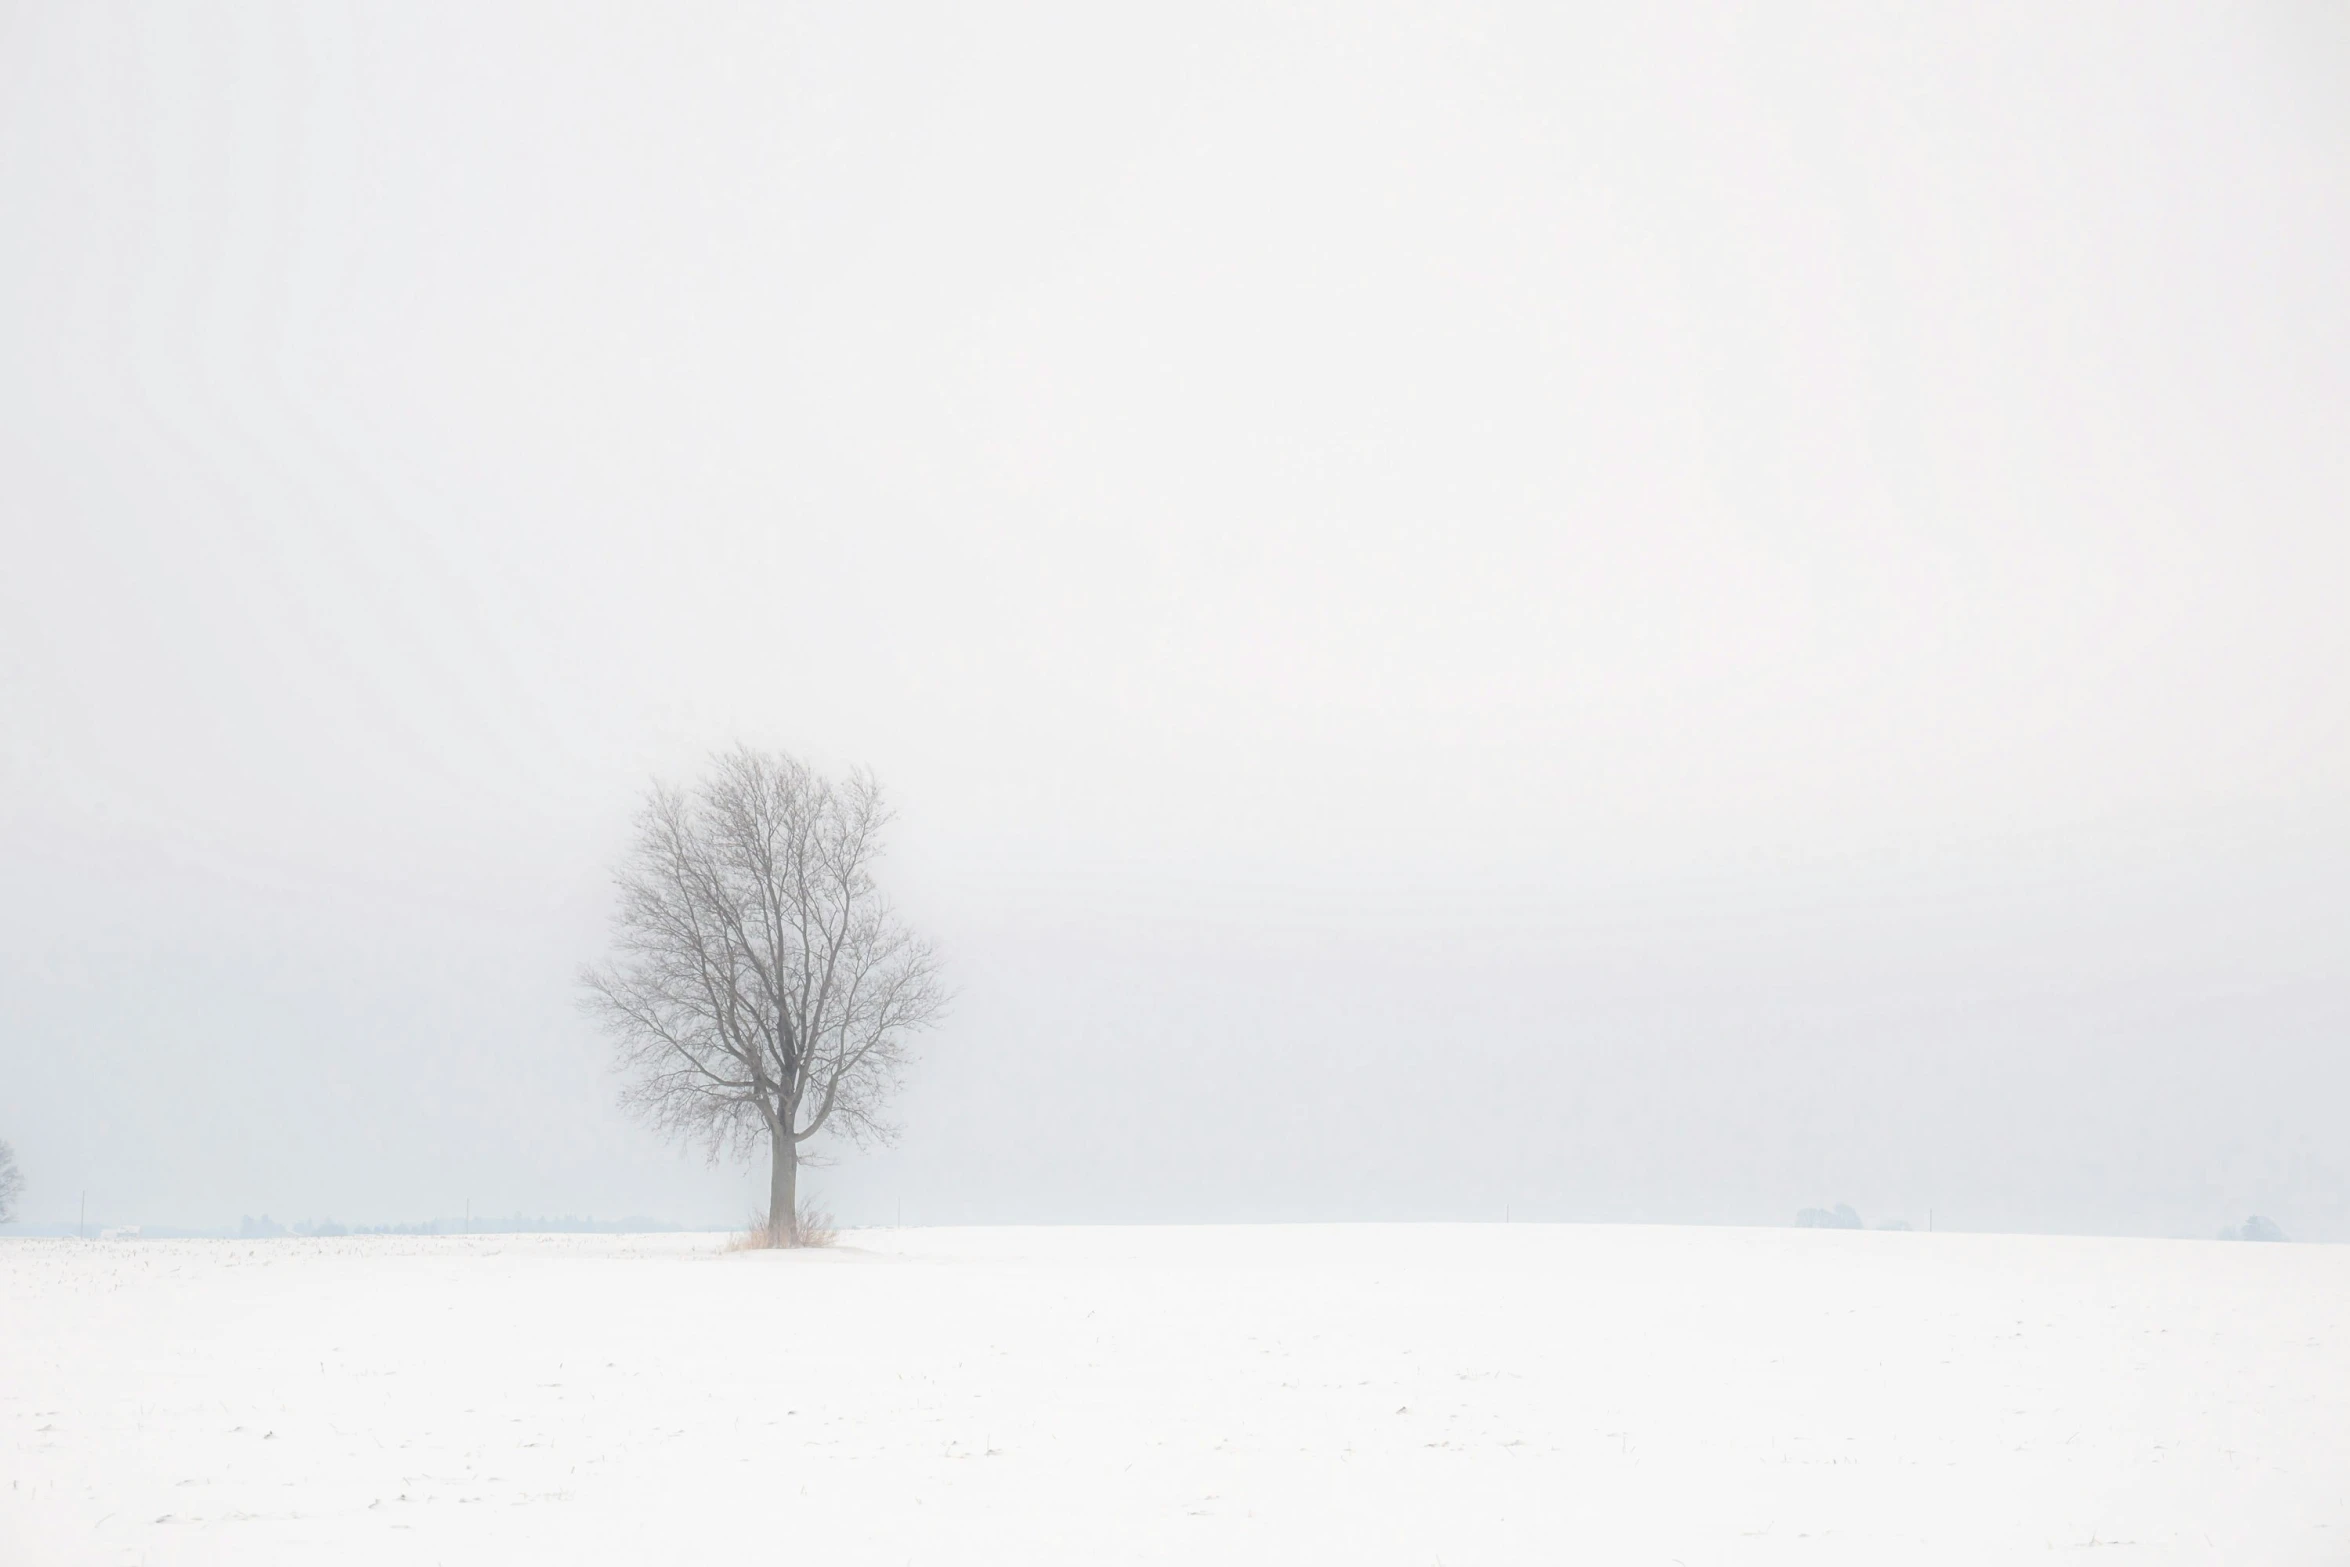 tree with no leaves on top of snowy field